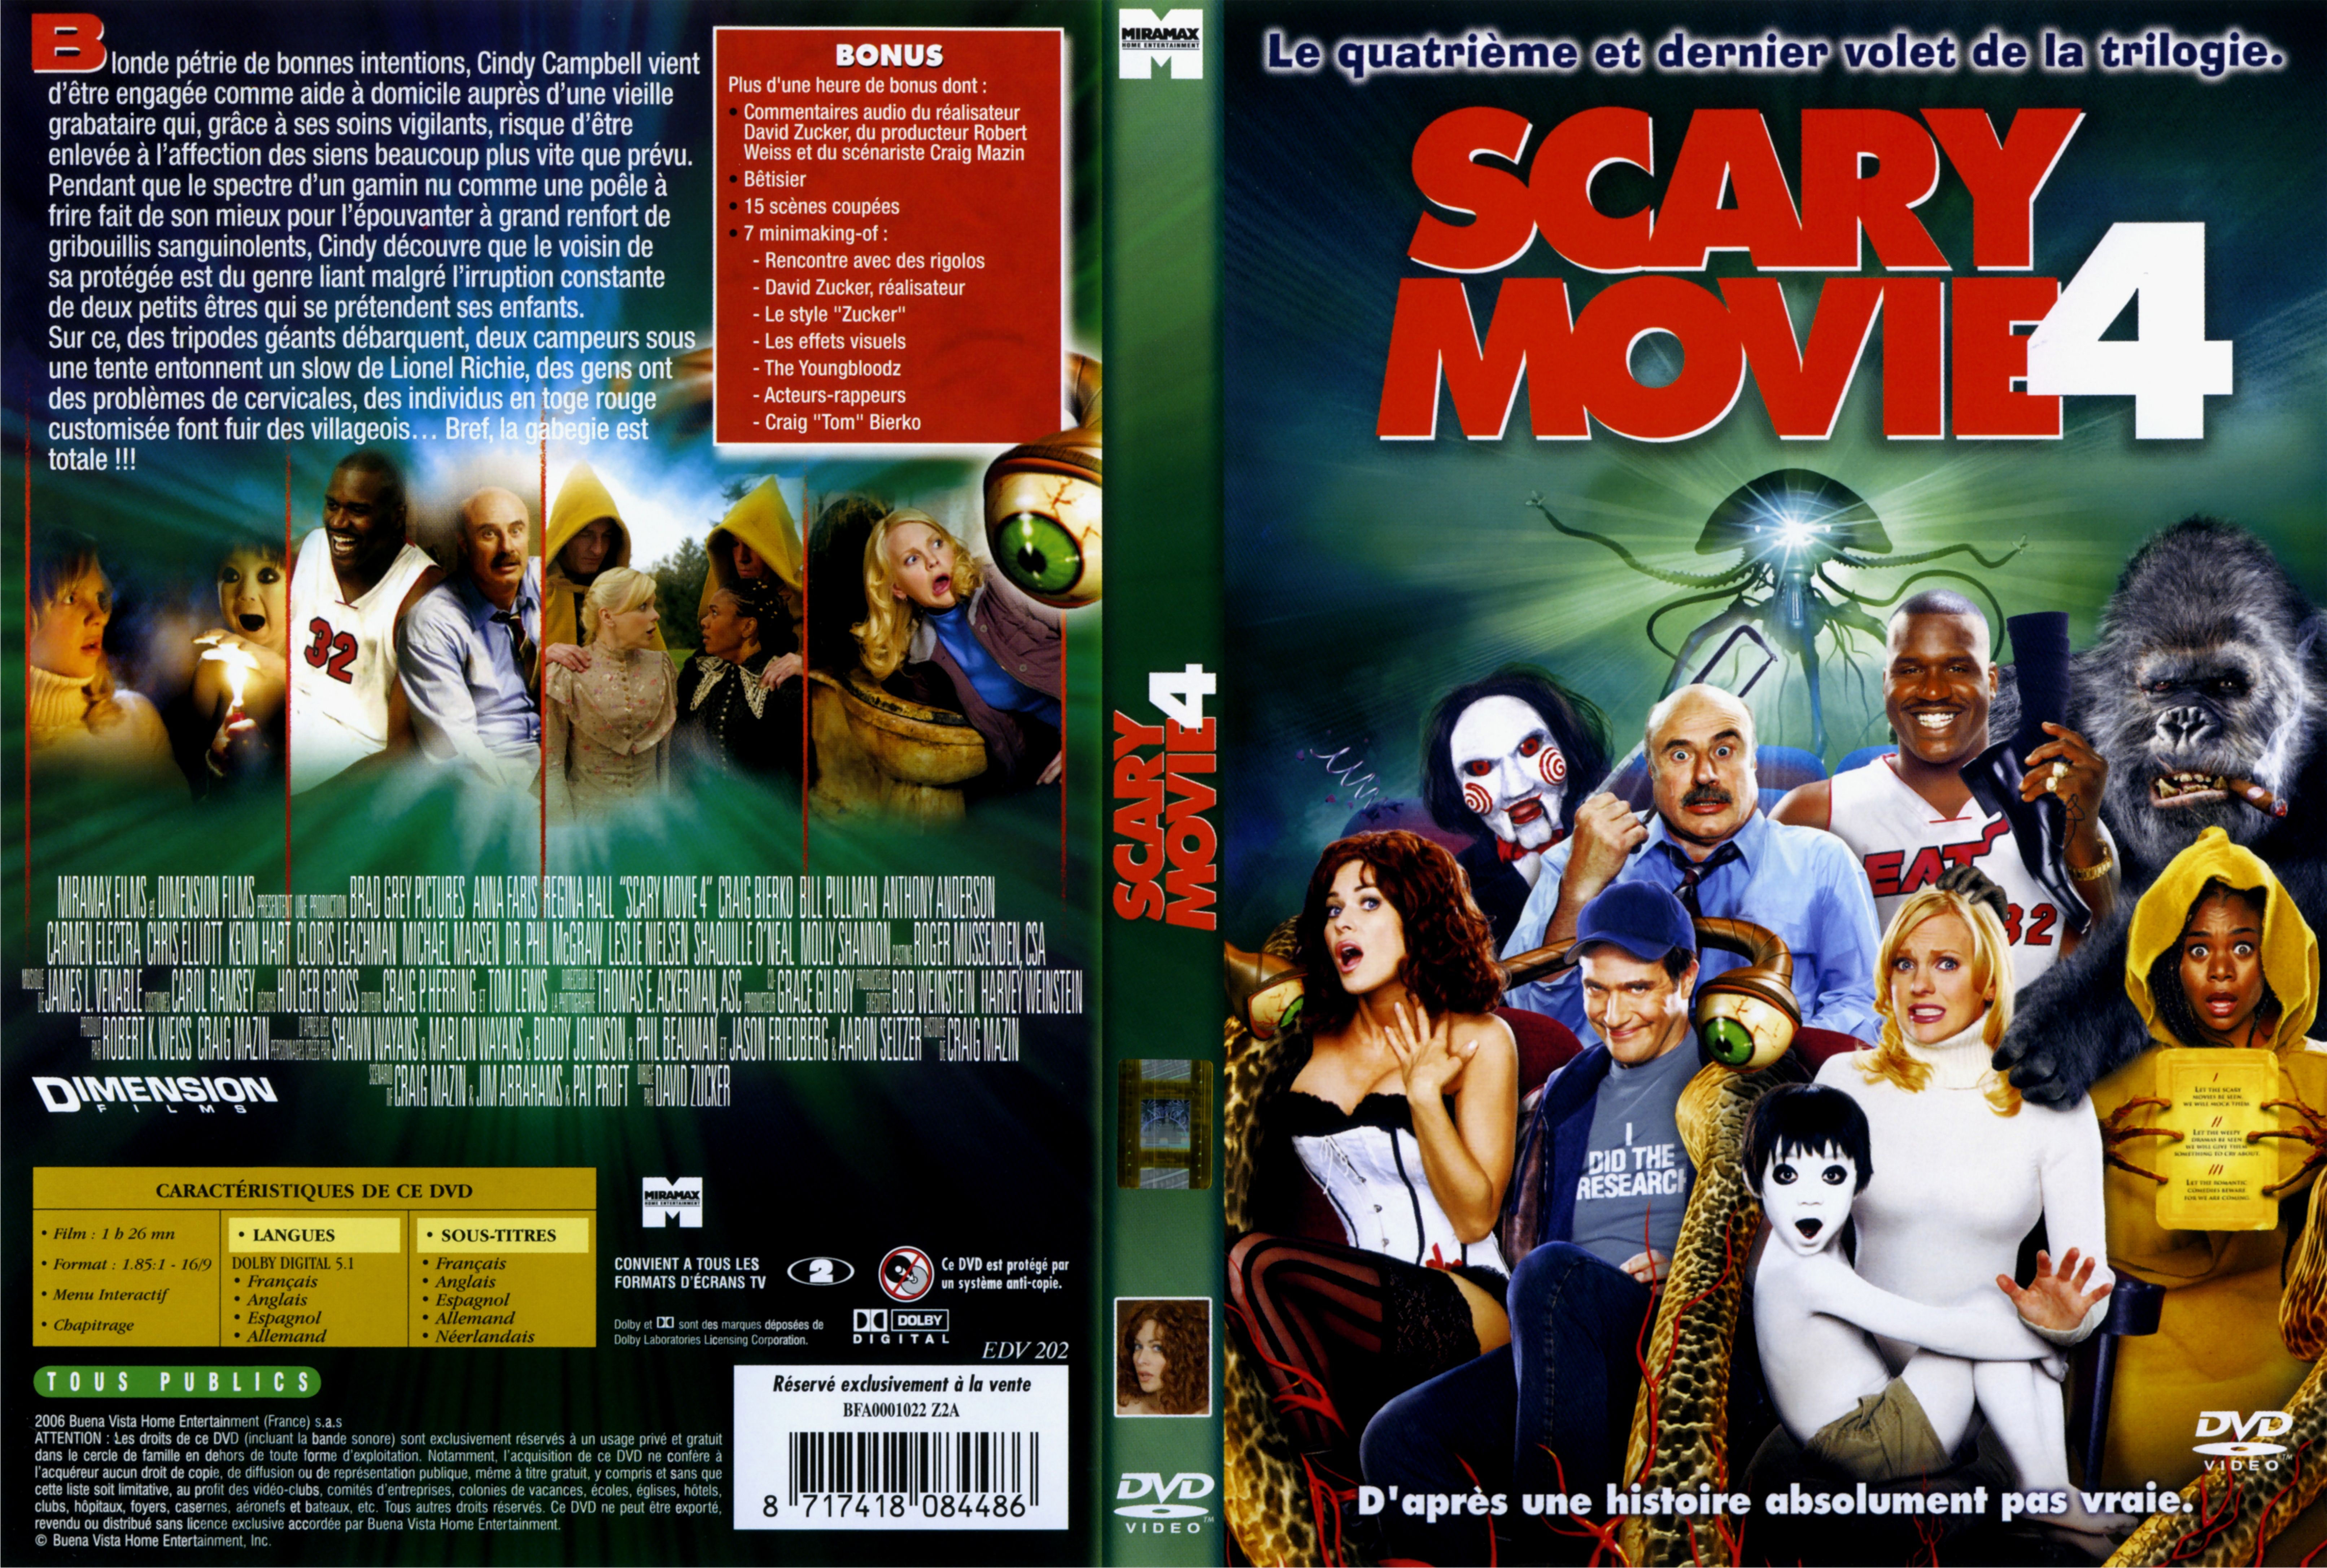 Jaquette DVD Scary movie 4